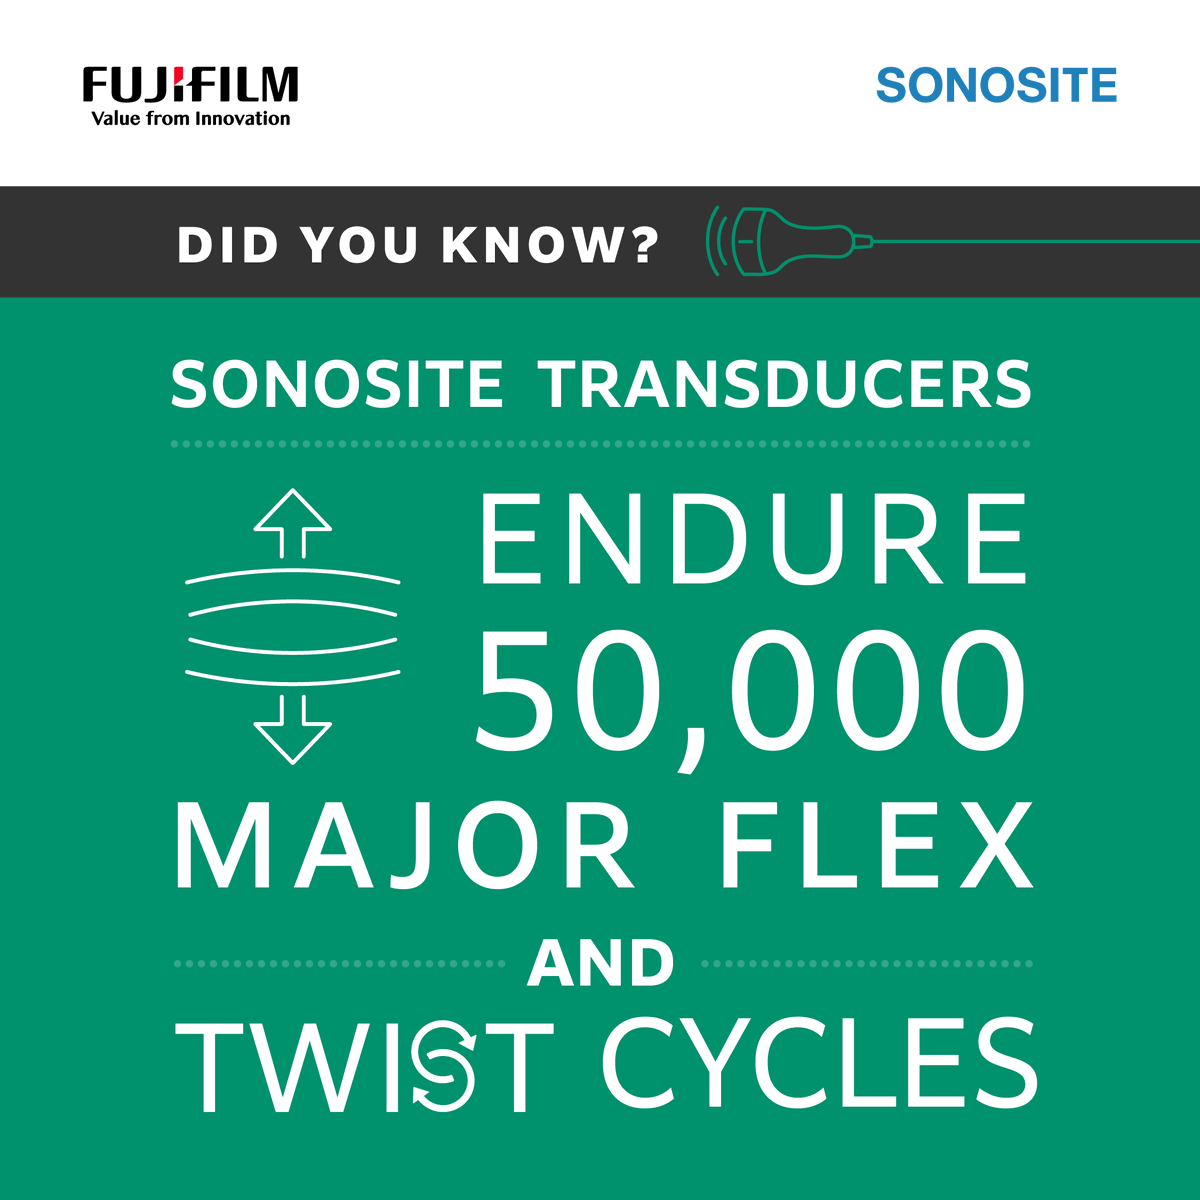 Did you know? Sonosite transducers endure a whopping 50,000 rotations, equivalent to 5 years of constant use! That's just one aspect of our rigorous testing process. Discover the array of tests we conduct to ensure their unyielding durability: brnw.ch/21wIDTb

#MedDevice